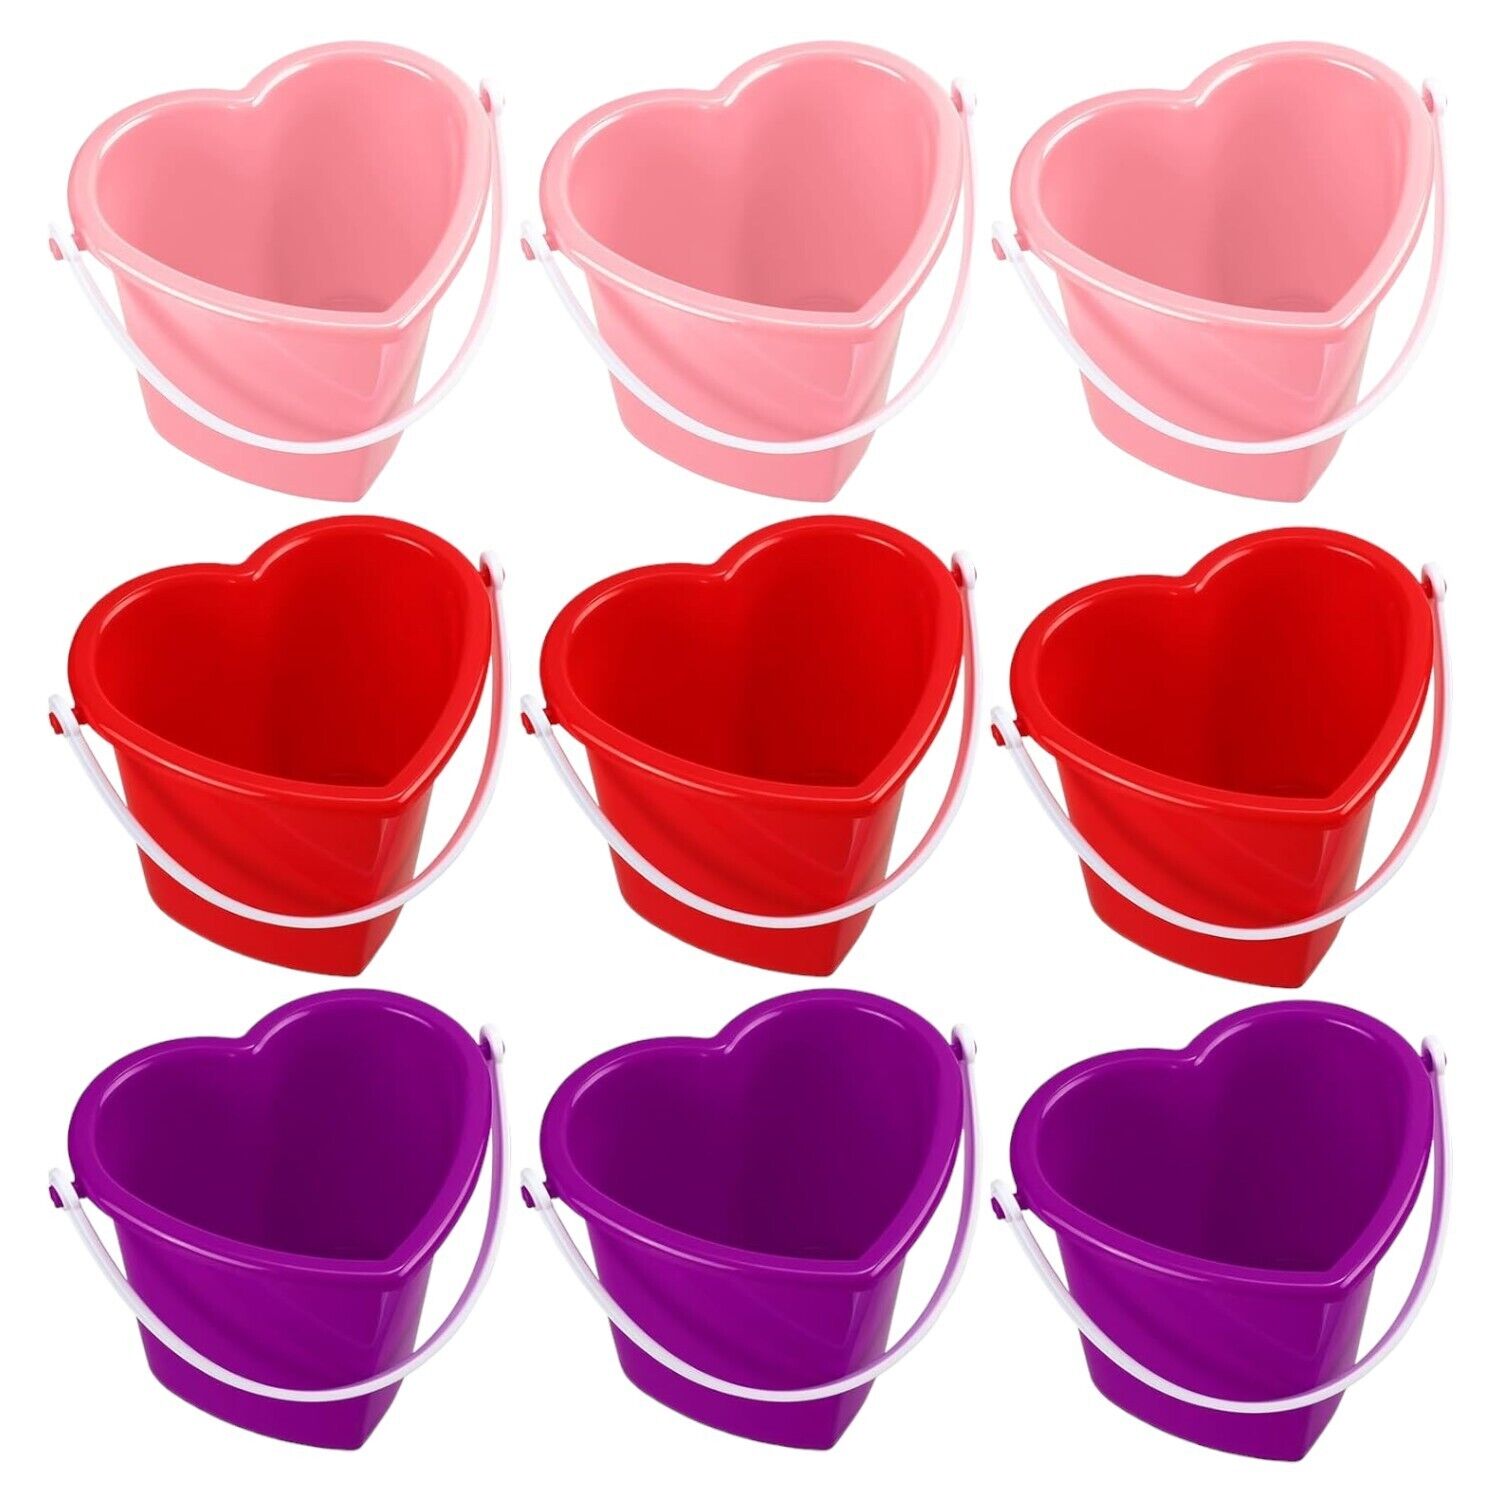 Plastic Heart Bucket Pail Treat Holder with Handle Valentine's Day - Lot of 9